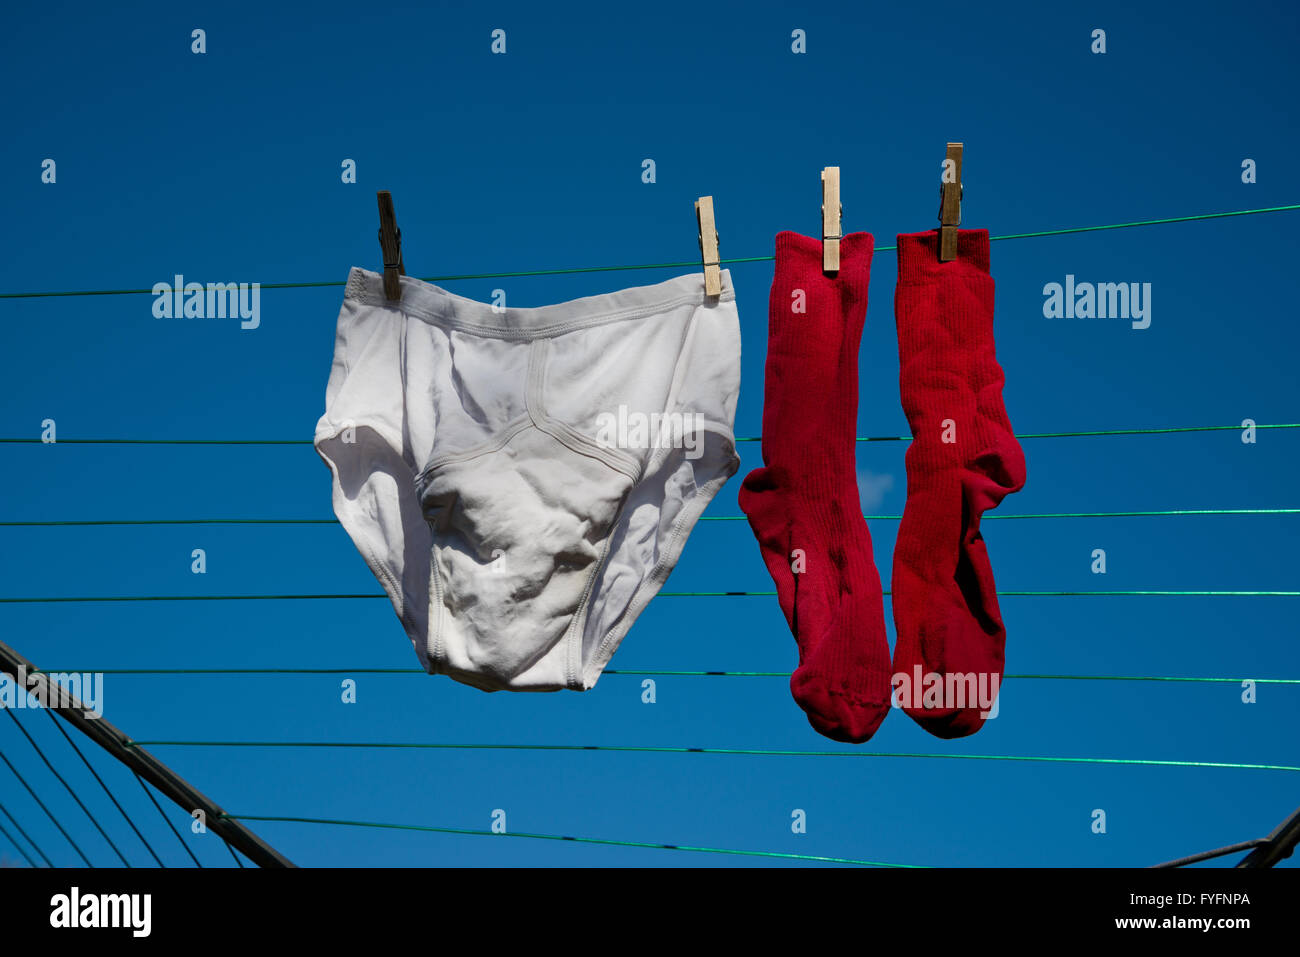 Washed clothes hanging out to dry on a washing line. Male